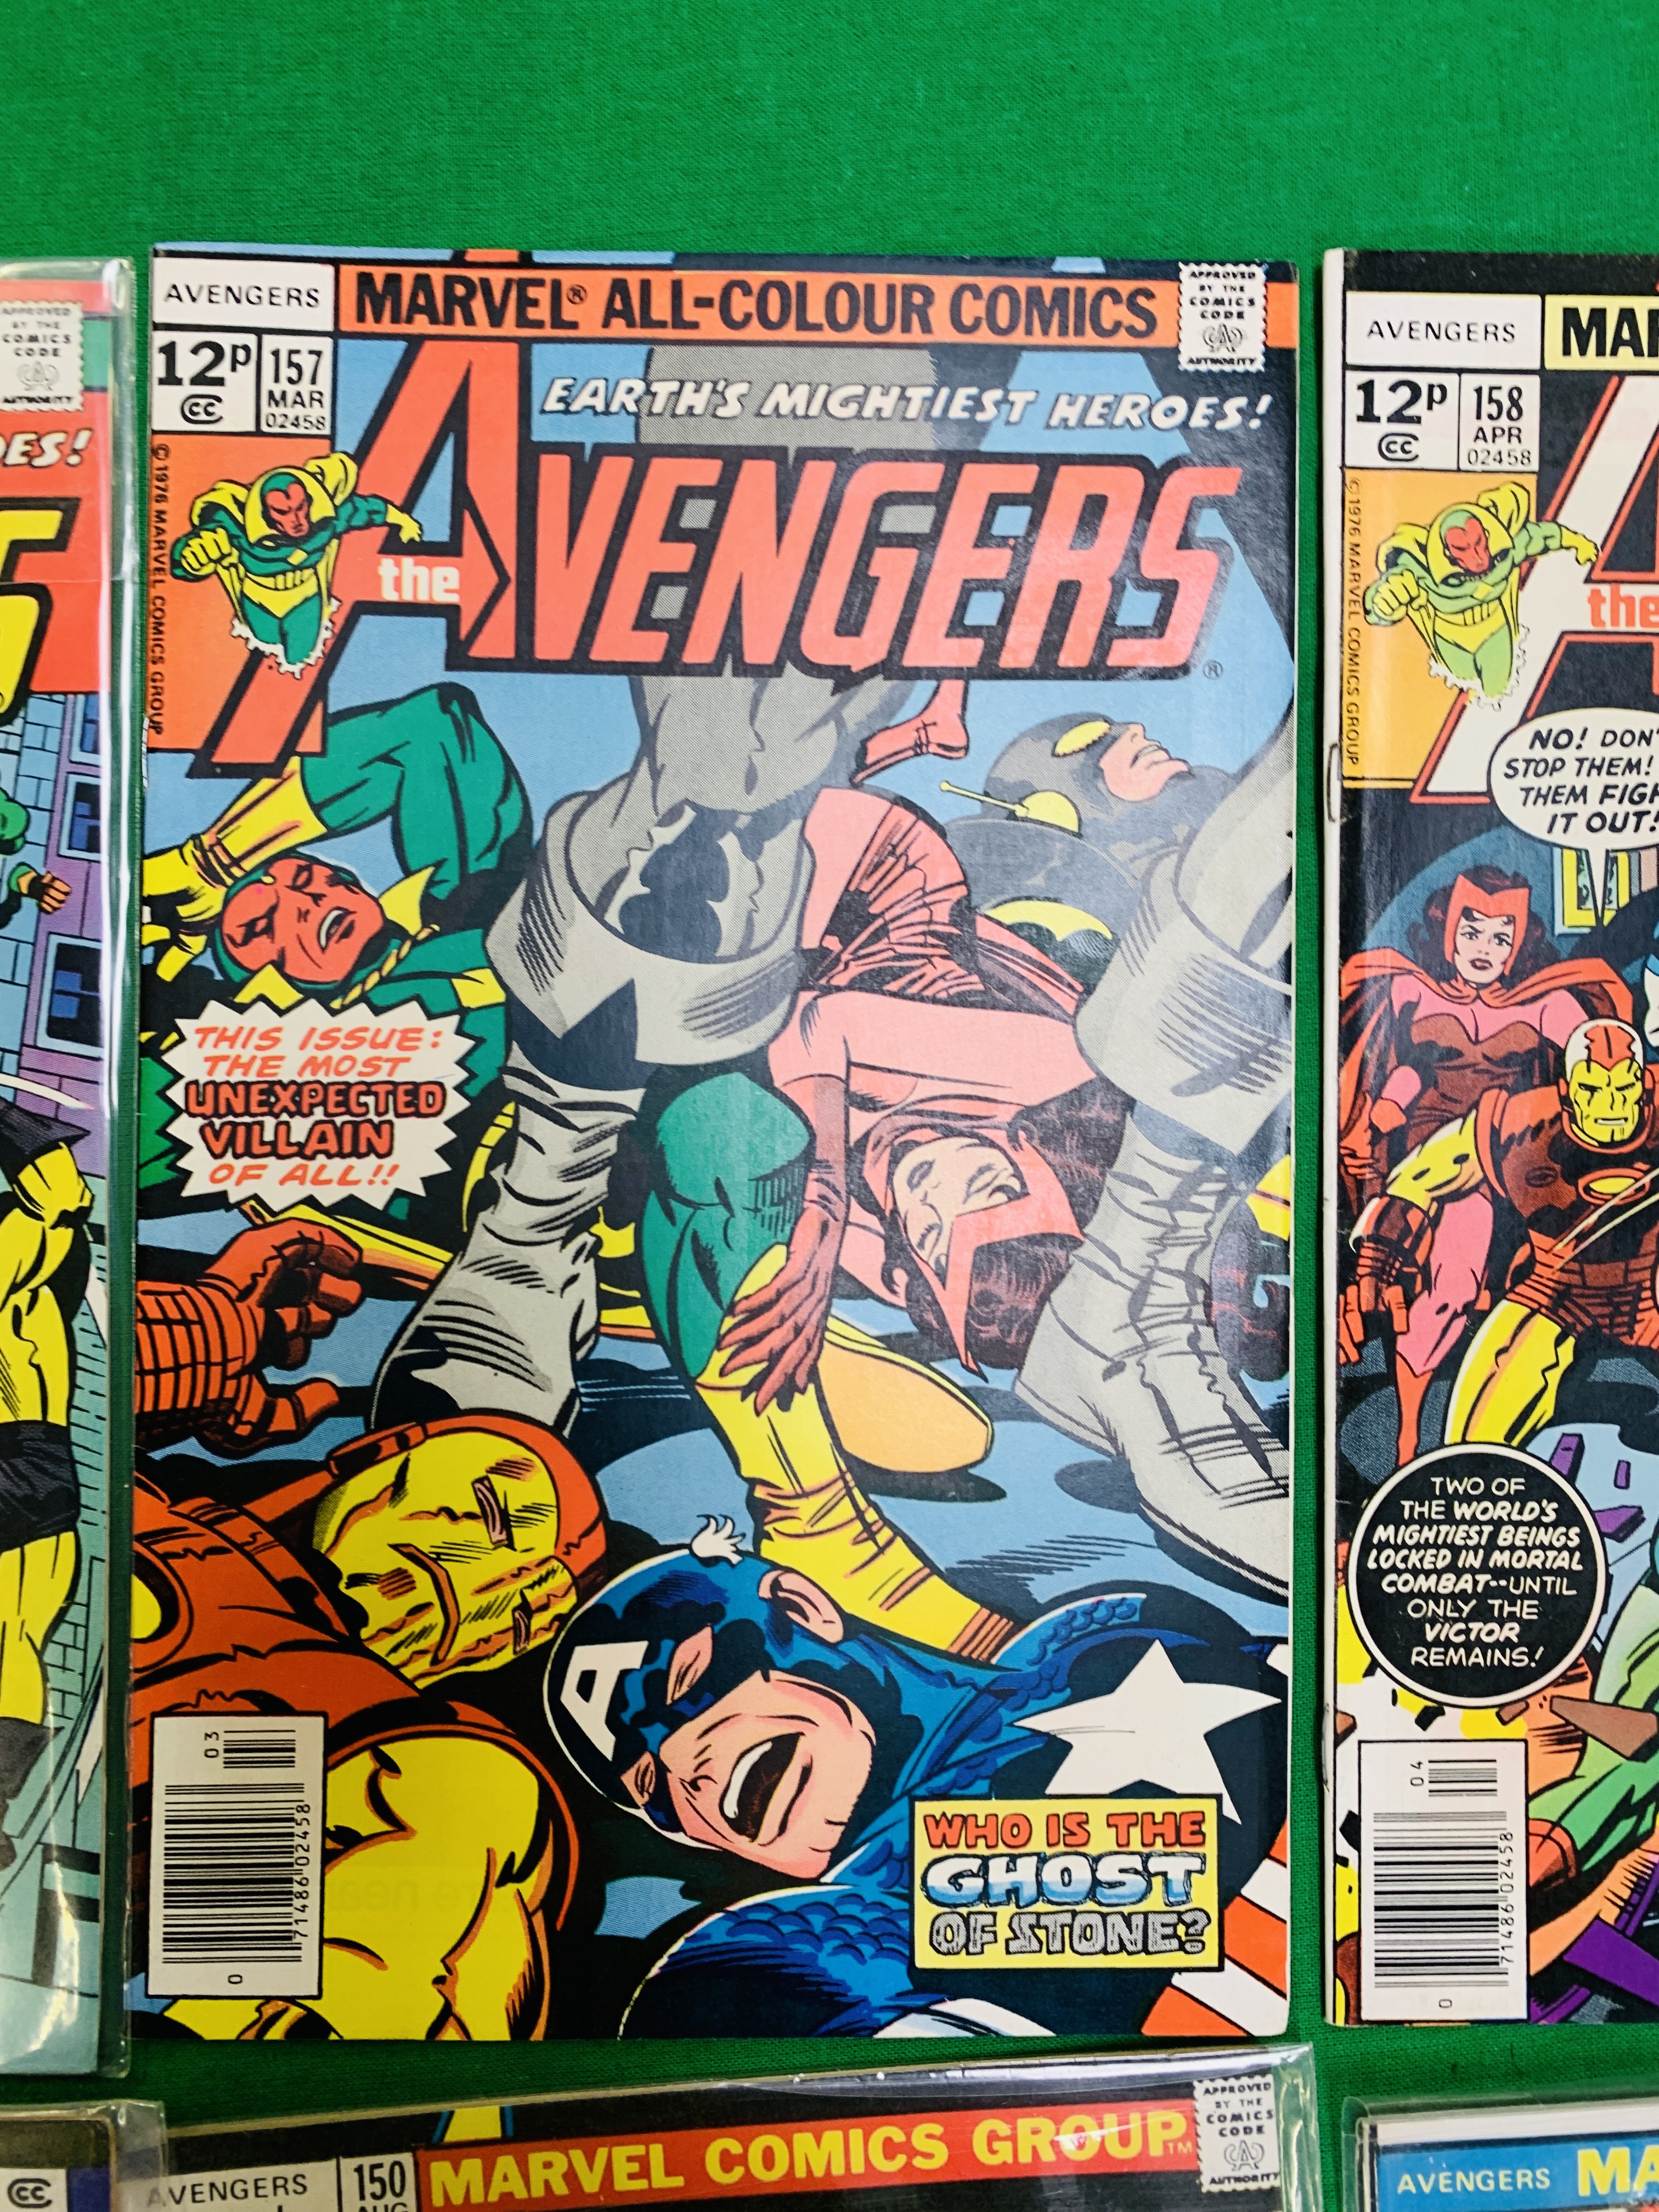 MARVEL COMICS THE AVENGERS NO. 101 - 299, MISSING ISSUES 103 AND 110. - Image 41 of 130